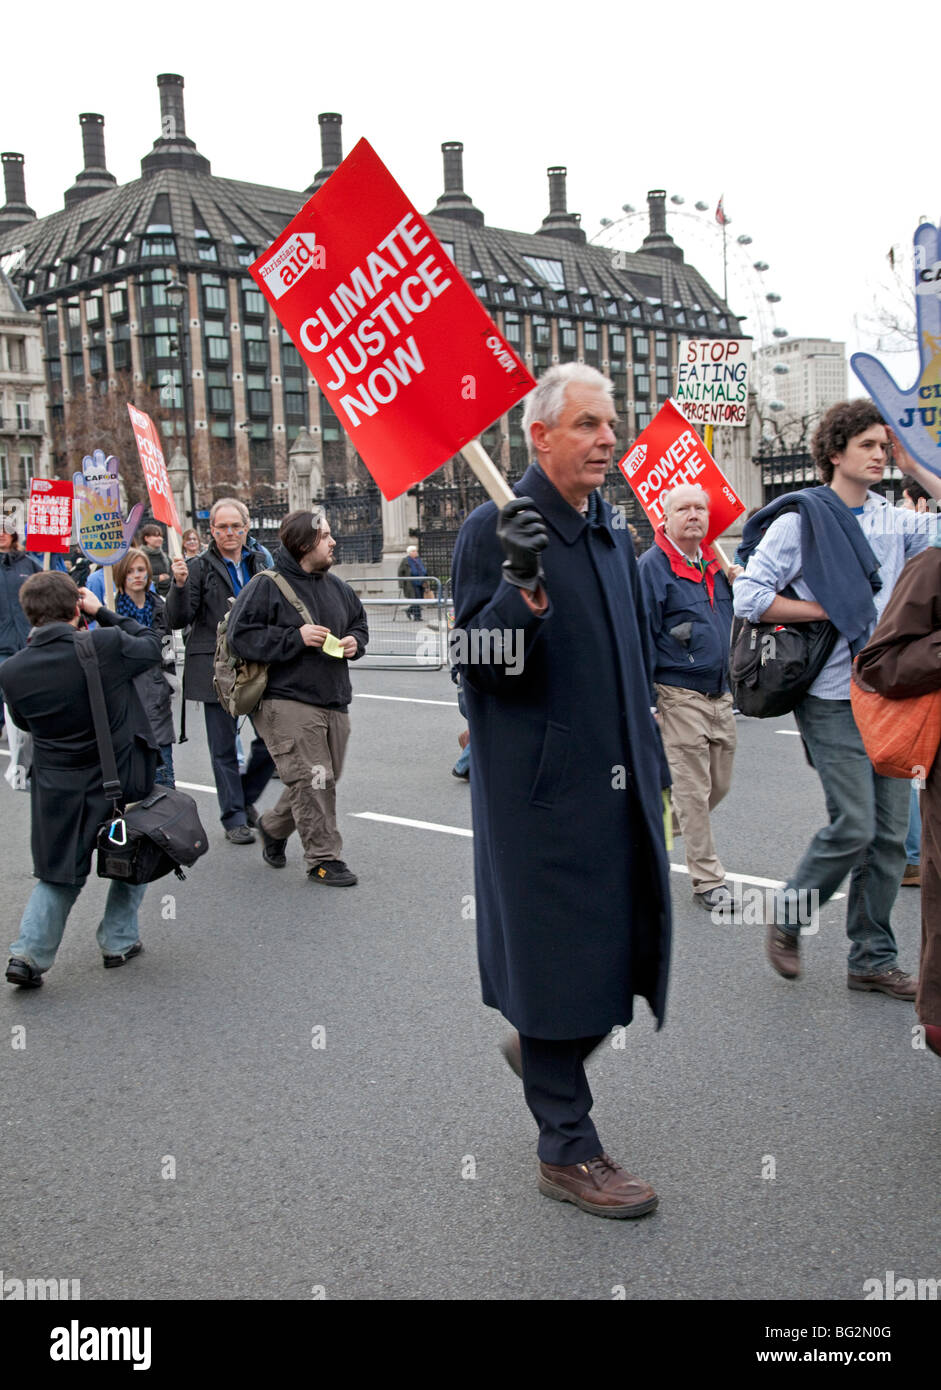 Christian Aid marcher with red banner The Wave Climate Change March London December 5 2009 Stock Photo